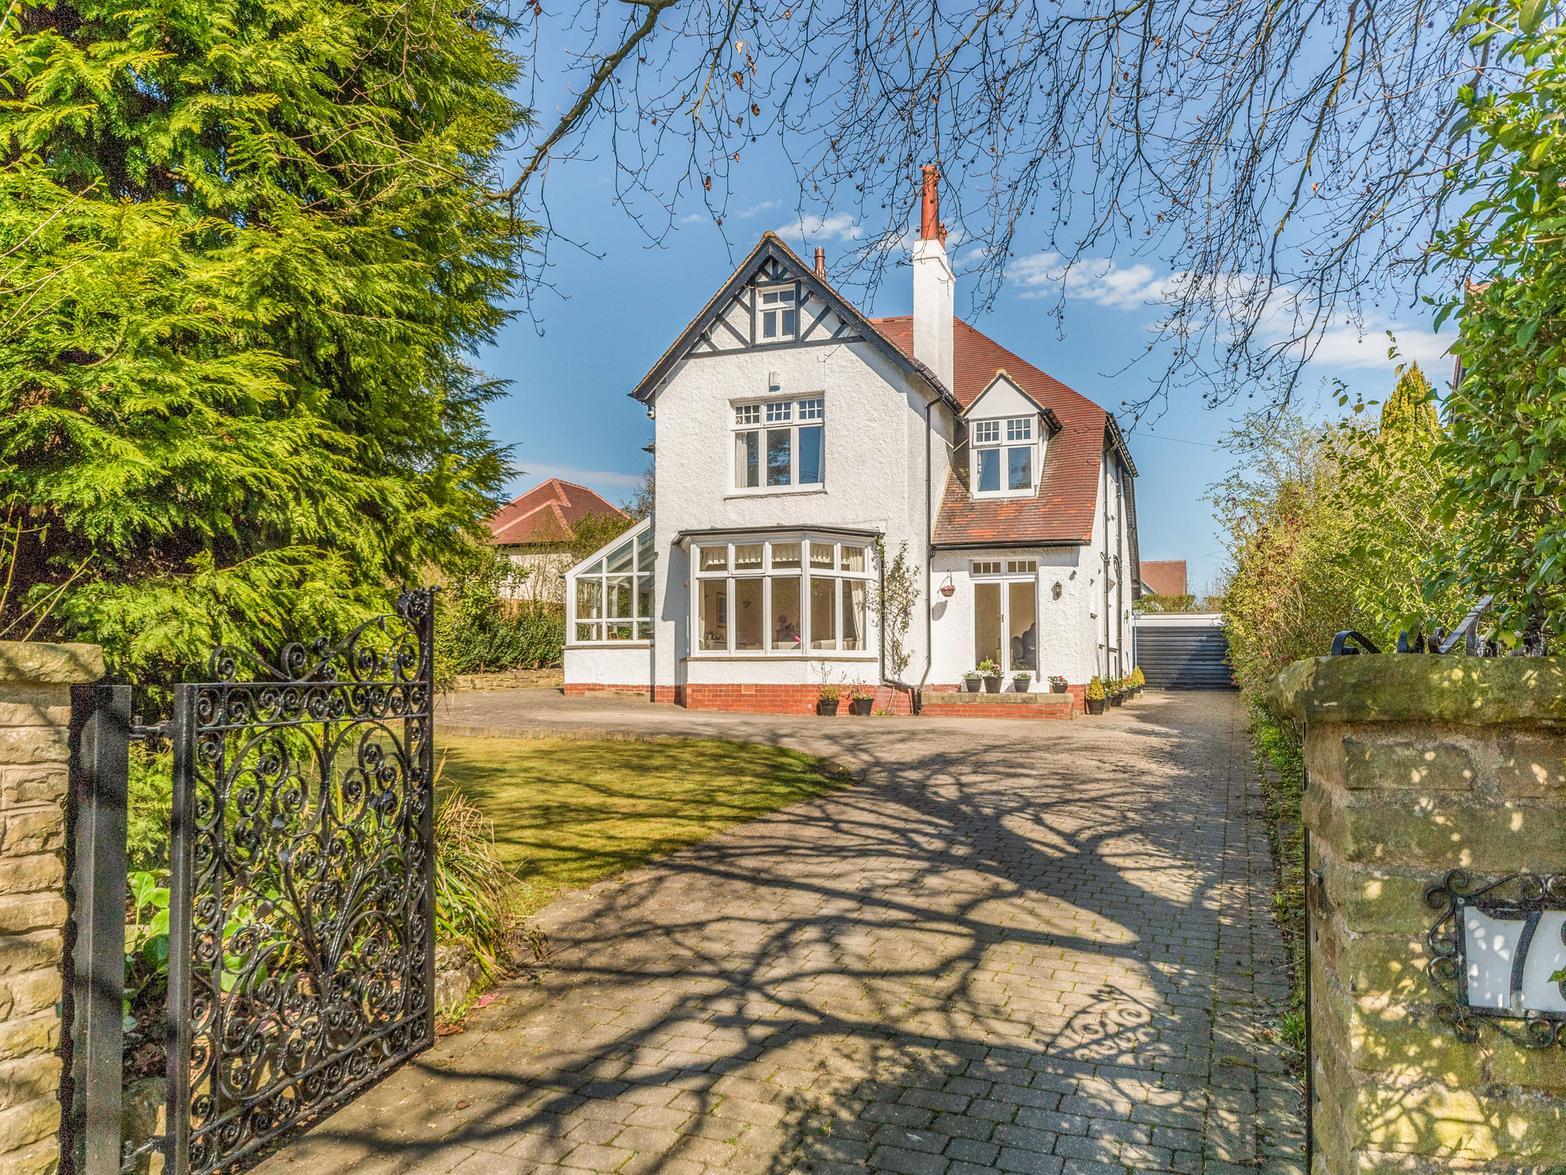 A highly desirable 6 bedroom detached family home, offering flexible and spacious accommodation over three floors, standing in a private plot in one of Harrogate's most prestigious residential areas, the Duchy Estate.